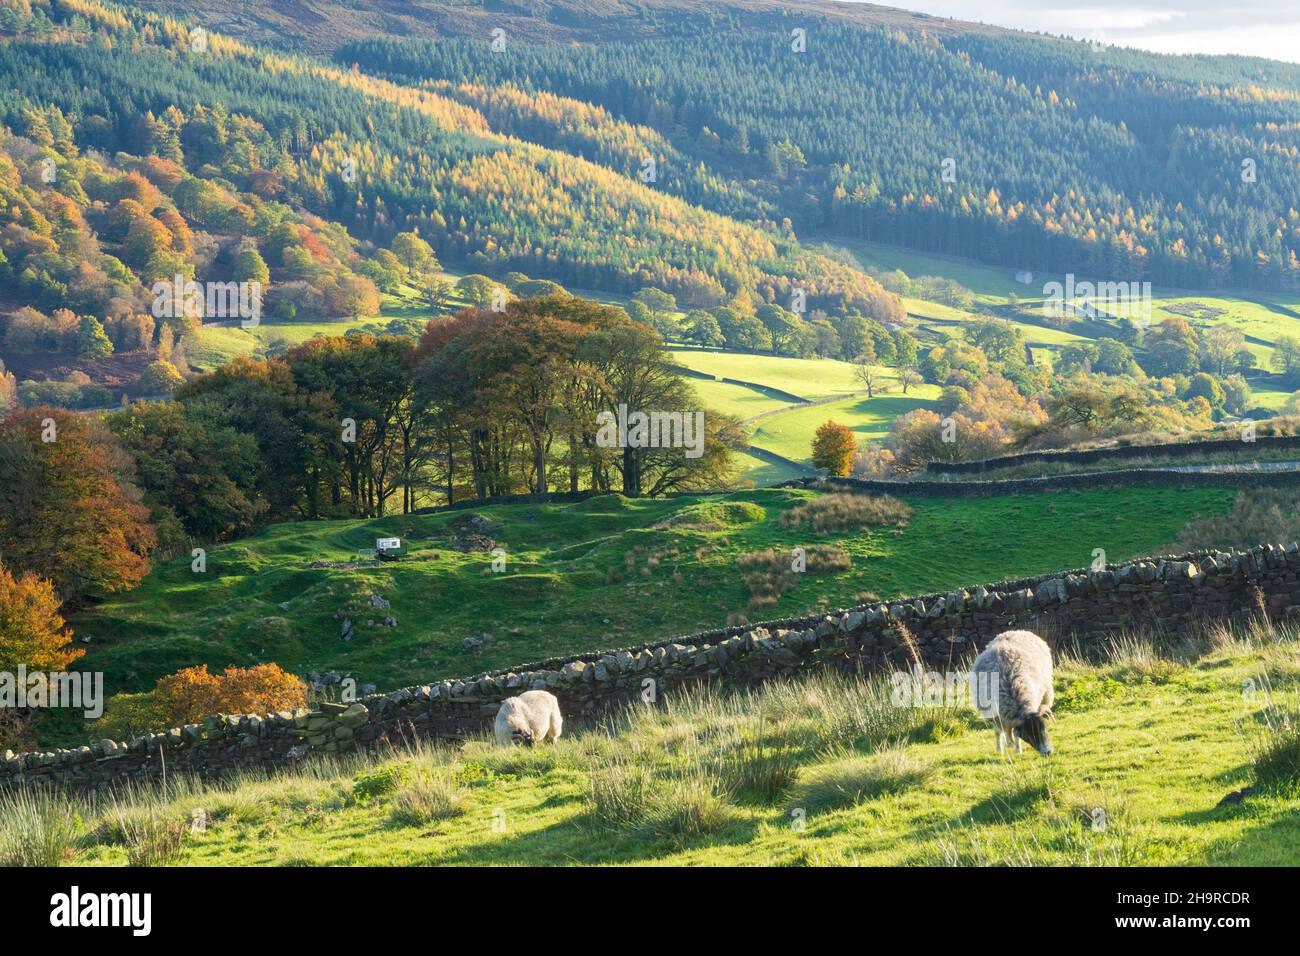 Sheep grazing near farming hamlet Skyreholme and Simon's Seat in Wharfedale, The Yorkshire Dales, England. Stock Photo